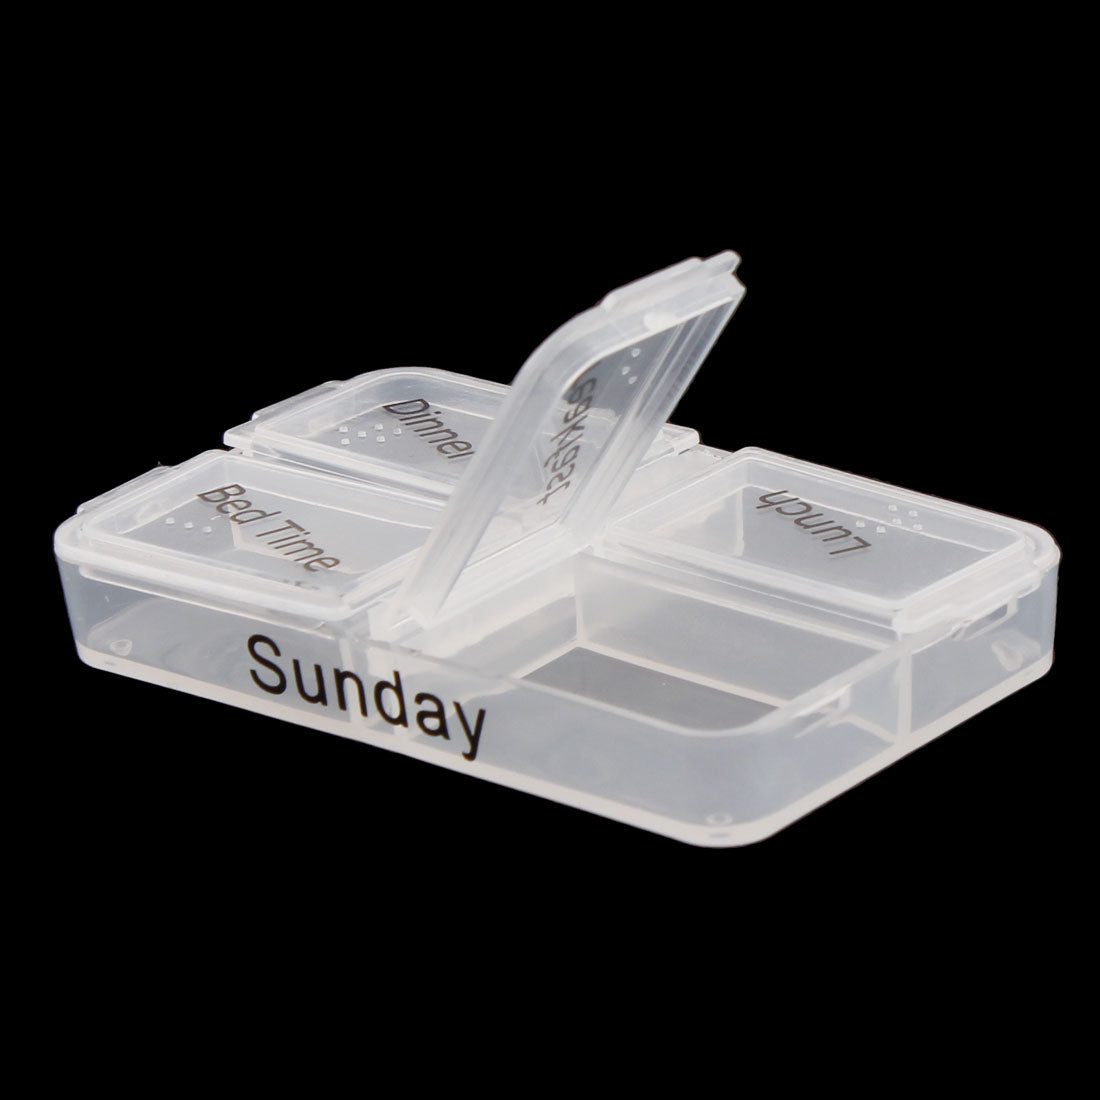 uxcell Uxcell Household Travel Detachable Medication Reminder Daily Am PM Weekly Pill Box Case